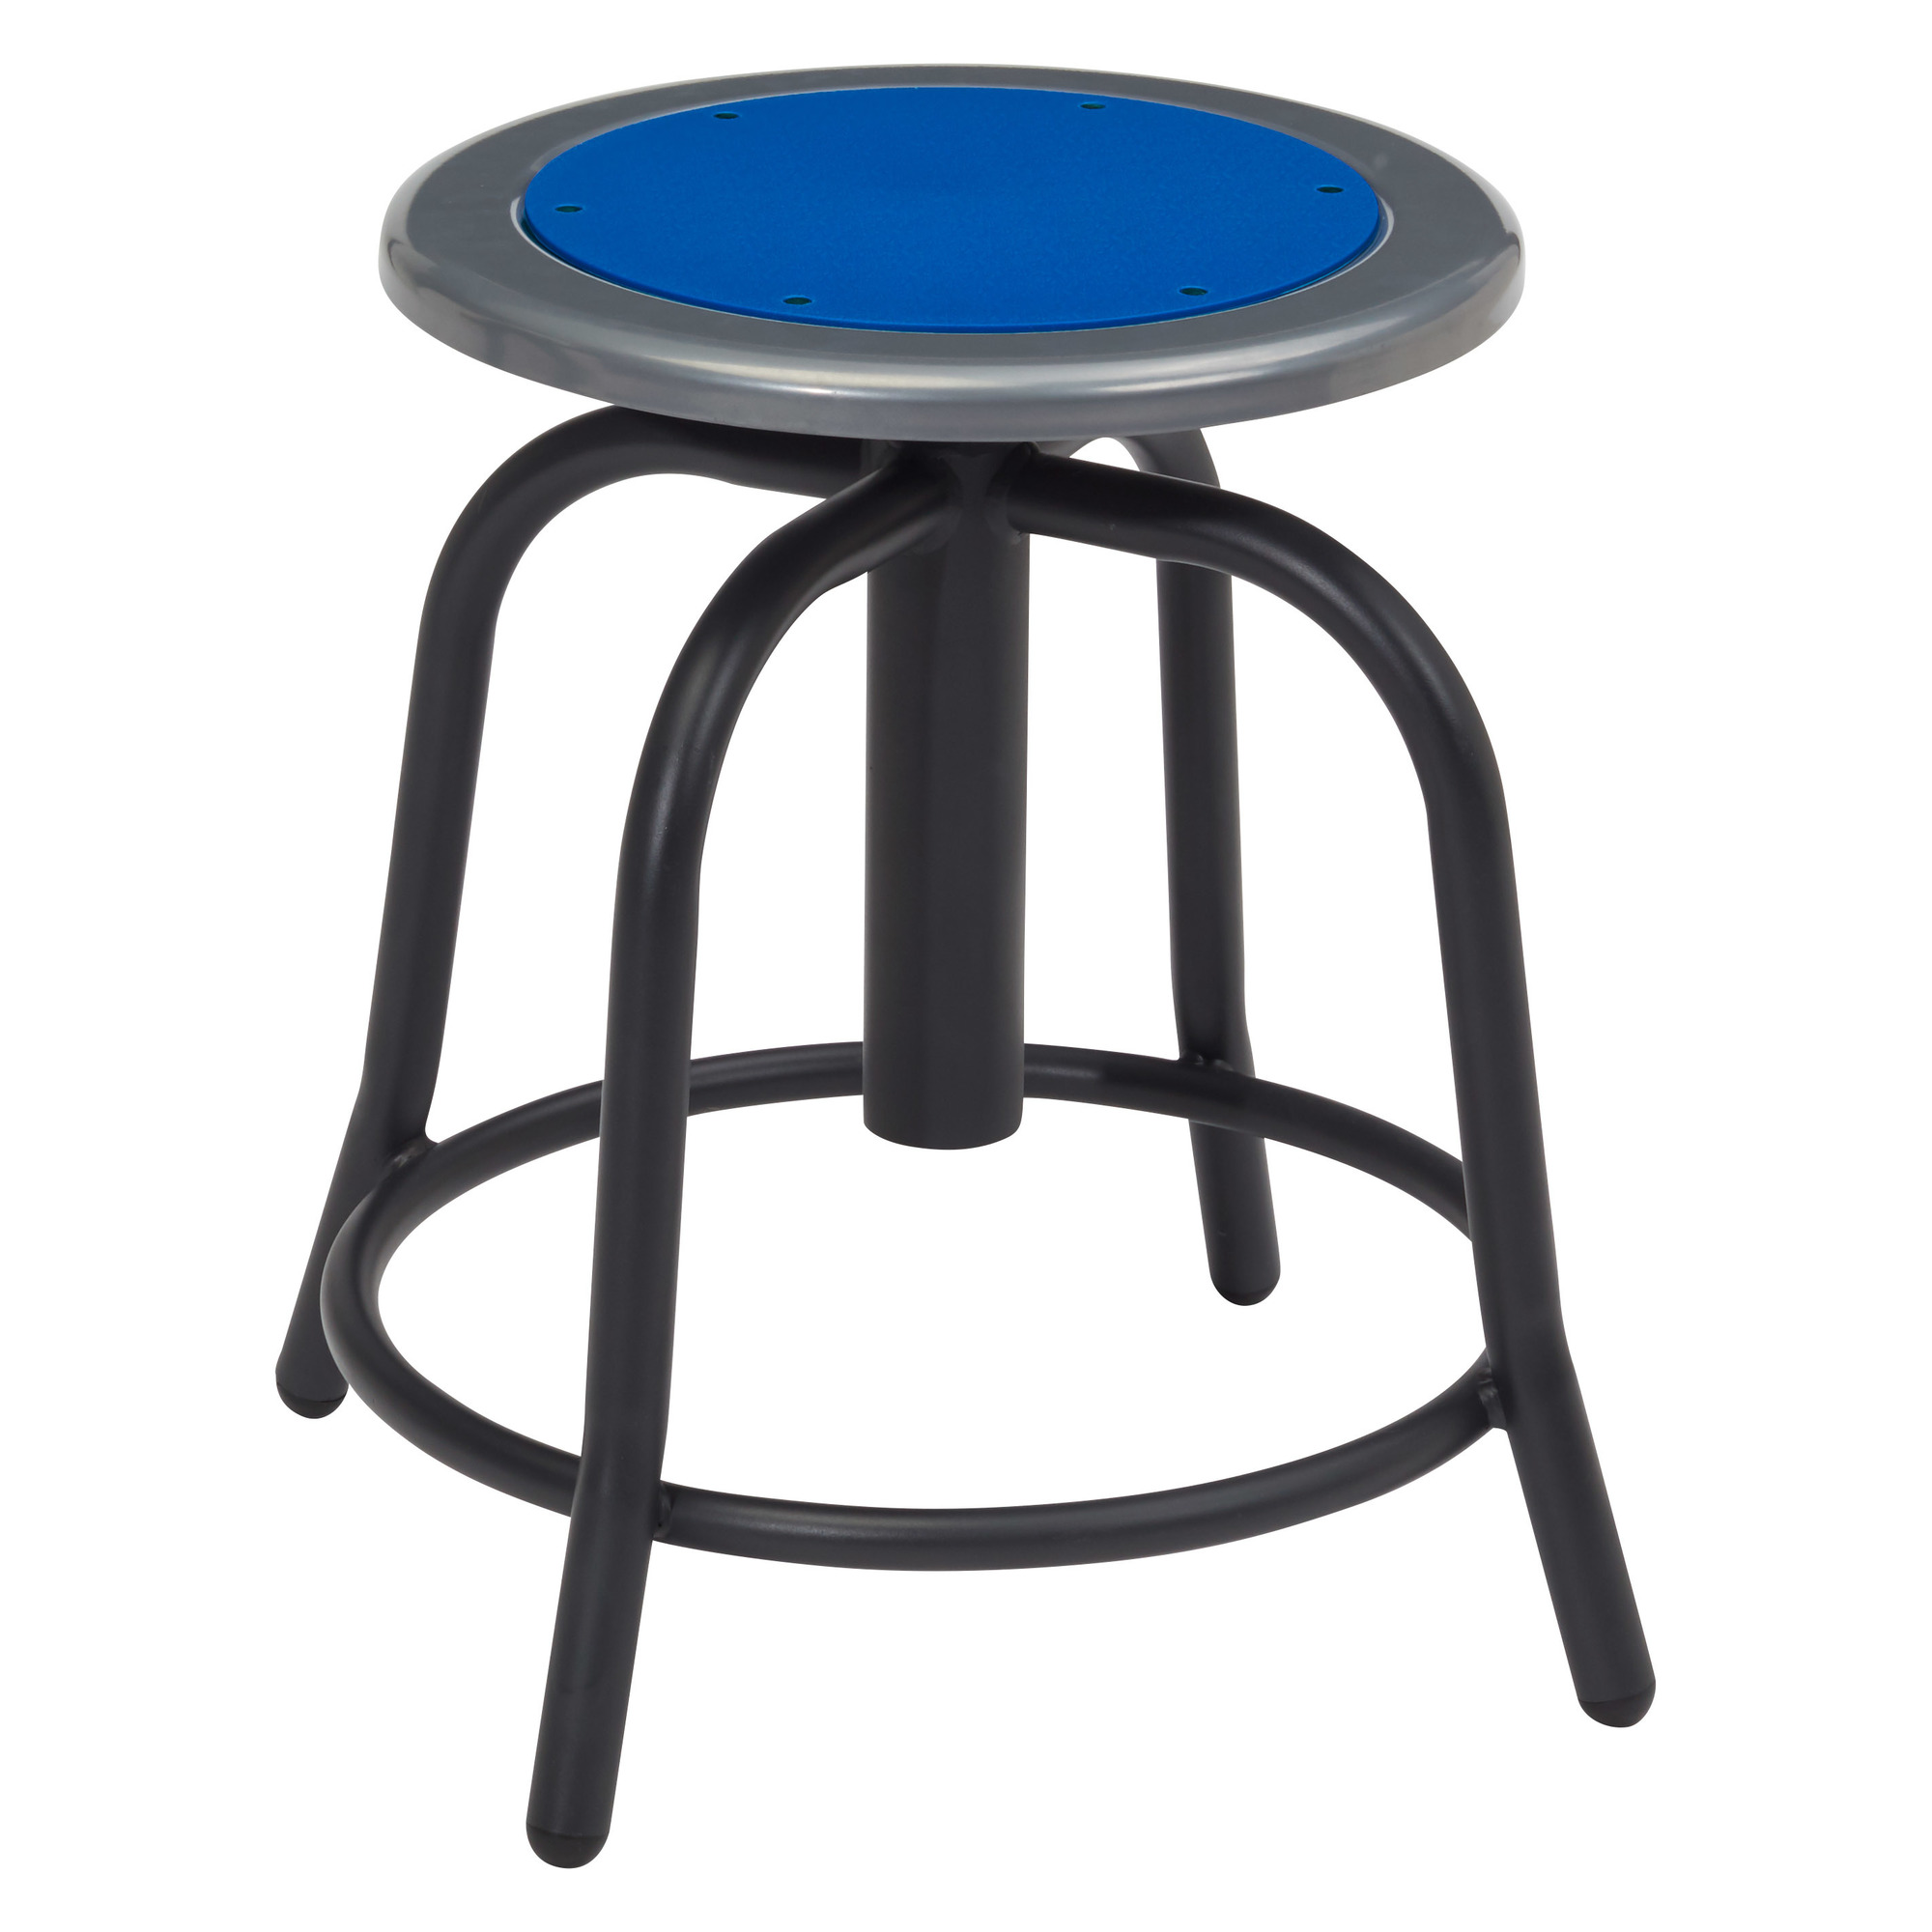 National Public Seating, 18â - 24â Height Adjust Swivel Stool, Primary Color Blue, Included (qty.) 1, Seating Type Office Stool, Model 6825-10